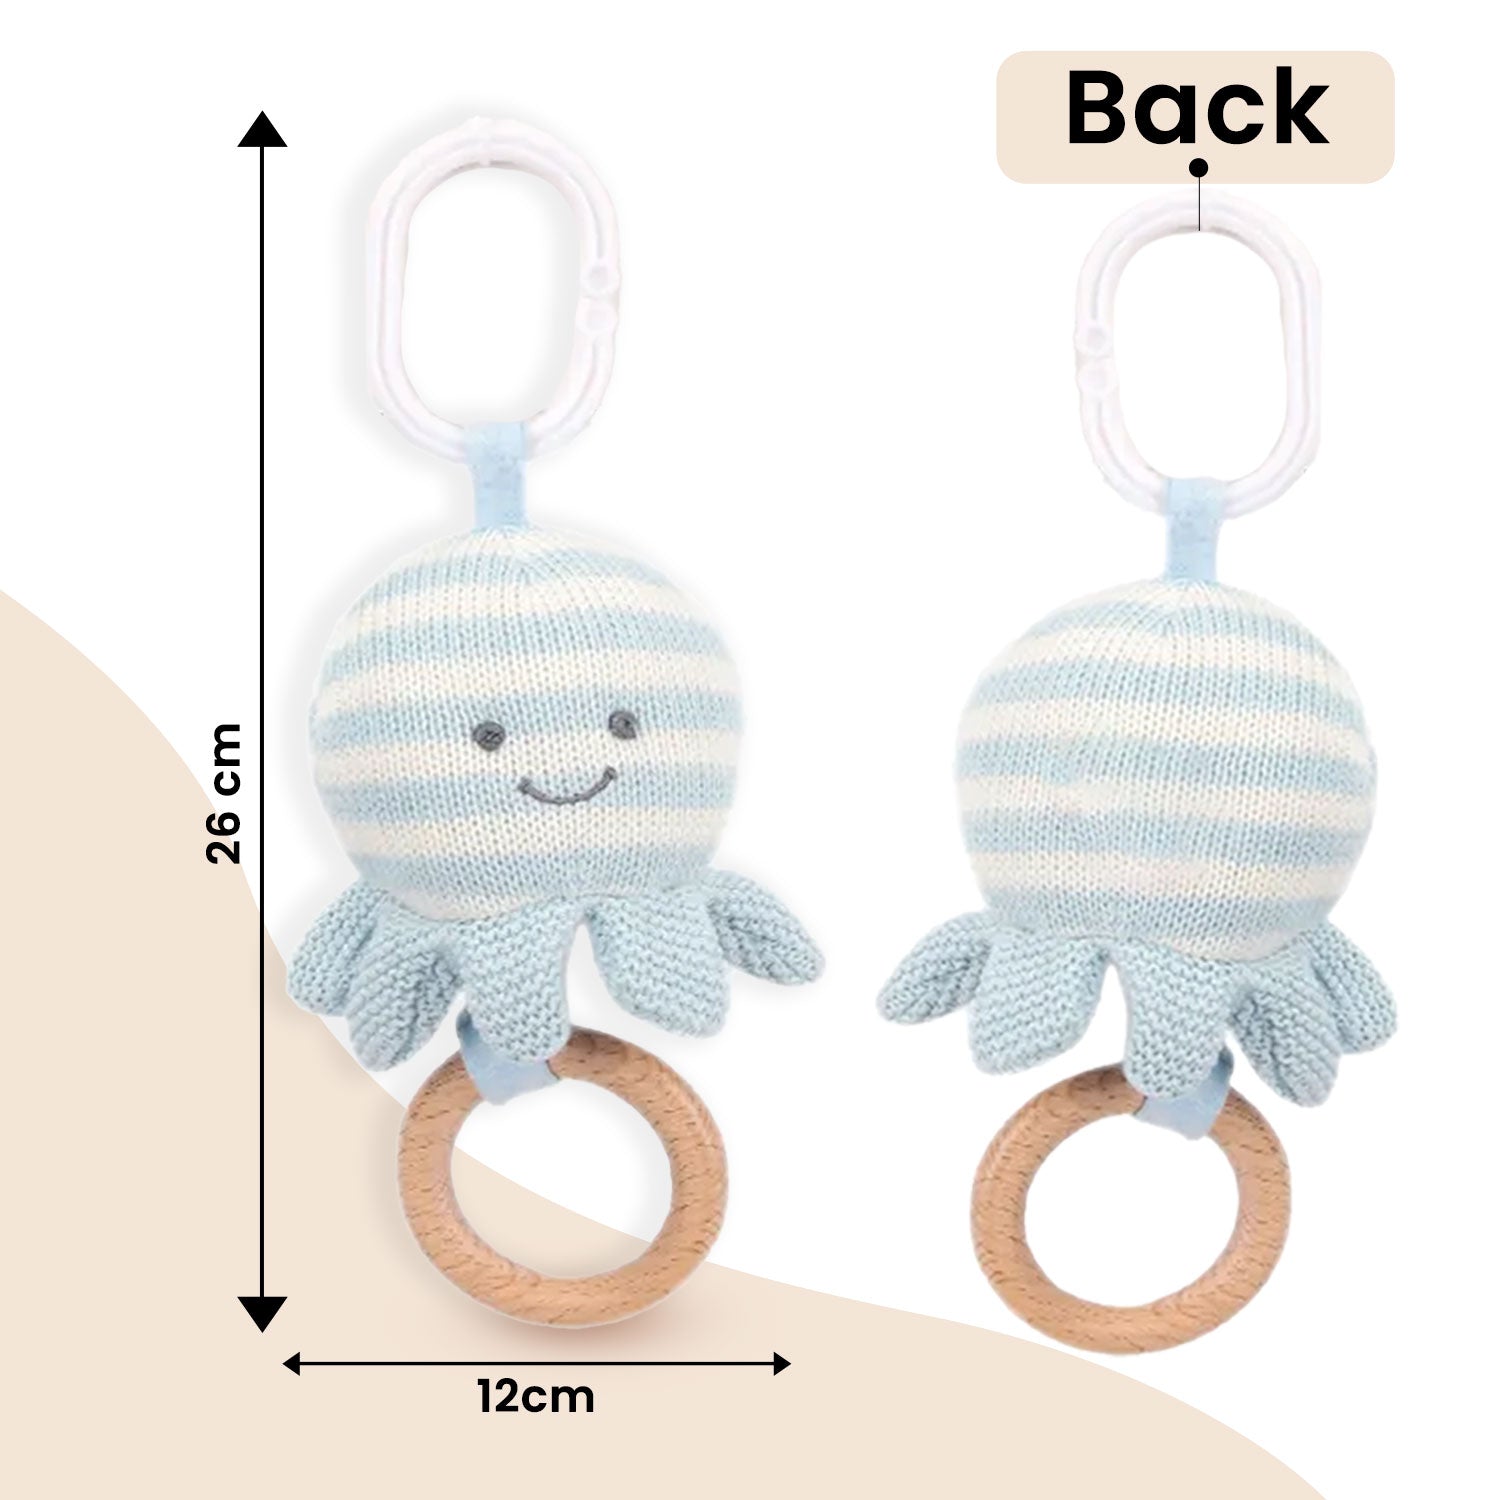 Baby Moo Octopus Wooden Ring Hand Grab Soft Crochet Vibration Pulling Toy - Blue